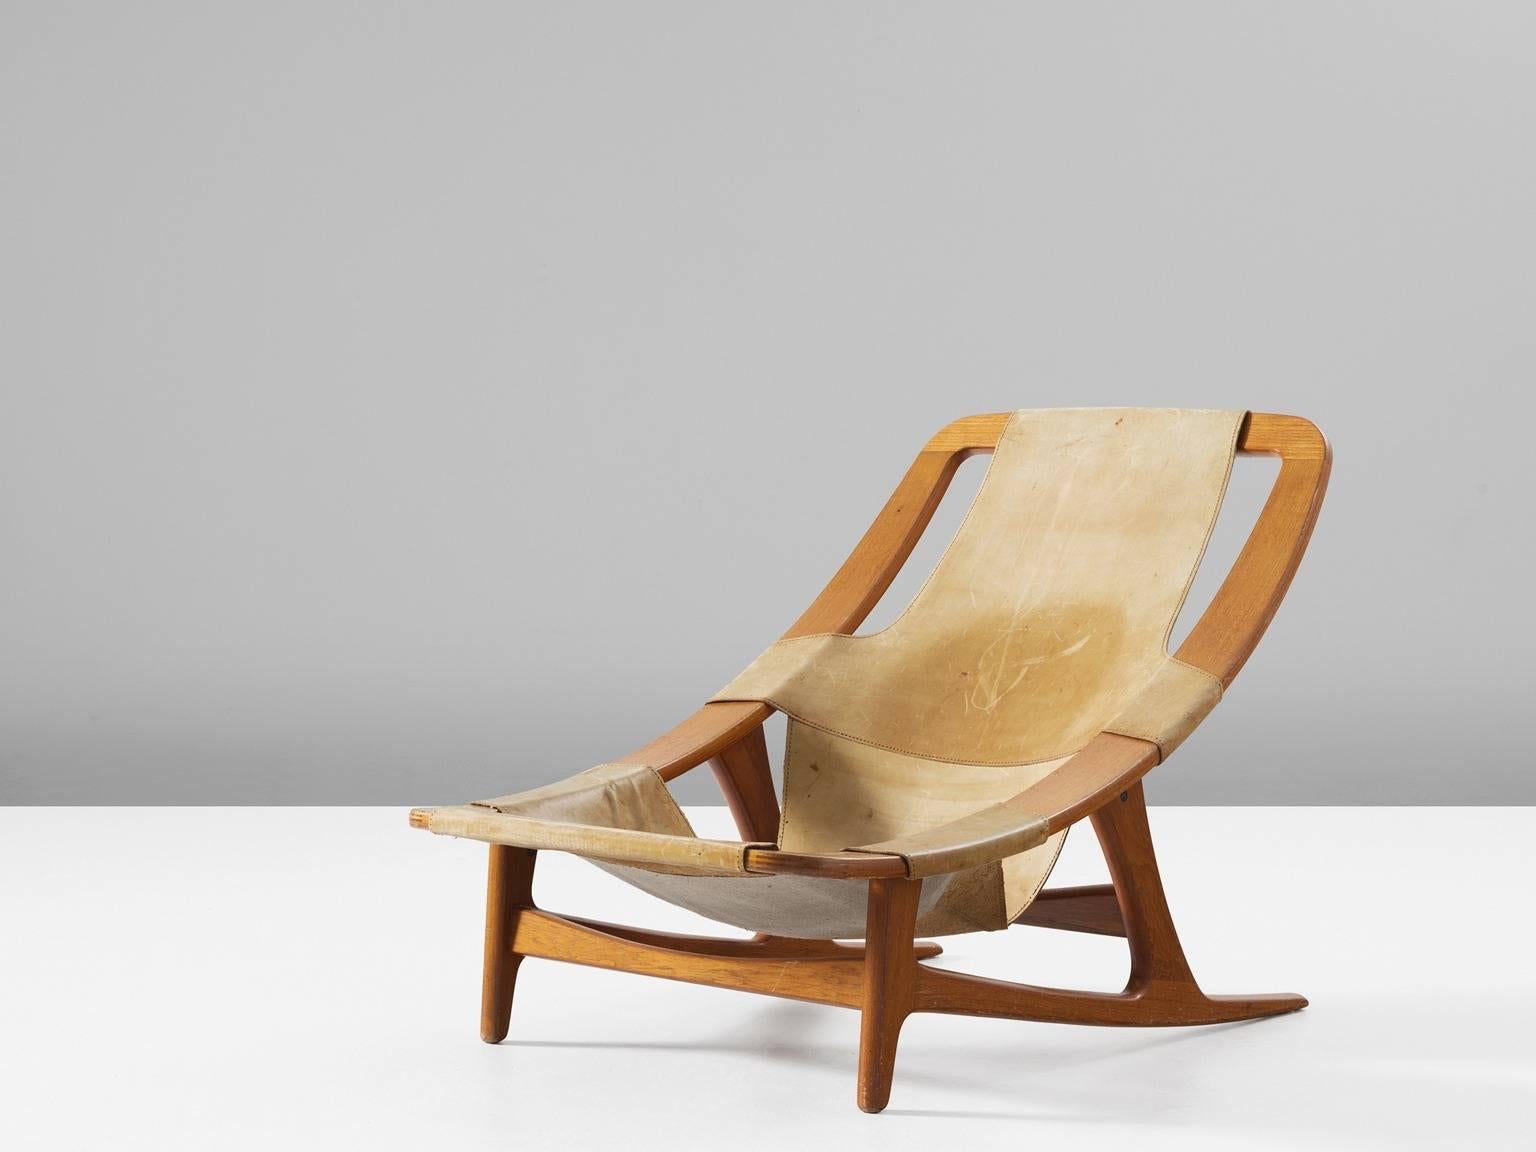 Lounge chair 'Holmenkollen', in teak and leather, by Arne F. Tidemand Ruud for Norcraft, Norway 1959. 

Fantastic lounge chair designed by Norwegian designer Arne F. Tidemand Ruud. This chair is very dynamic due it's design and shapes. The